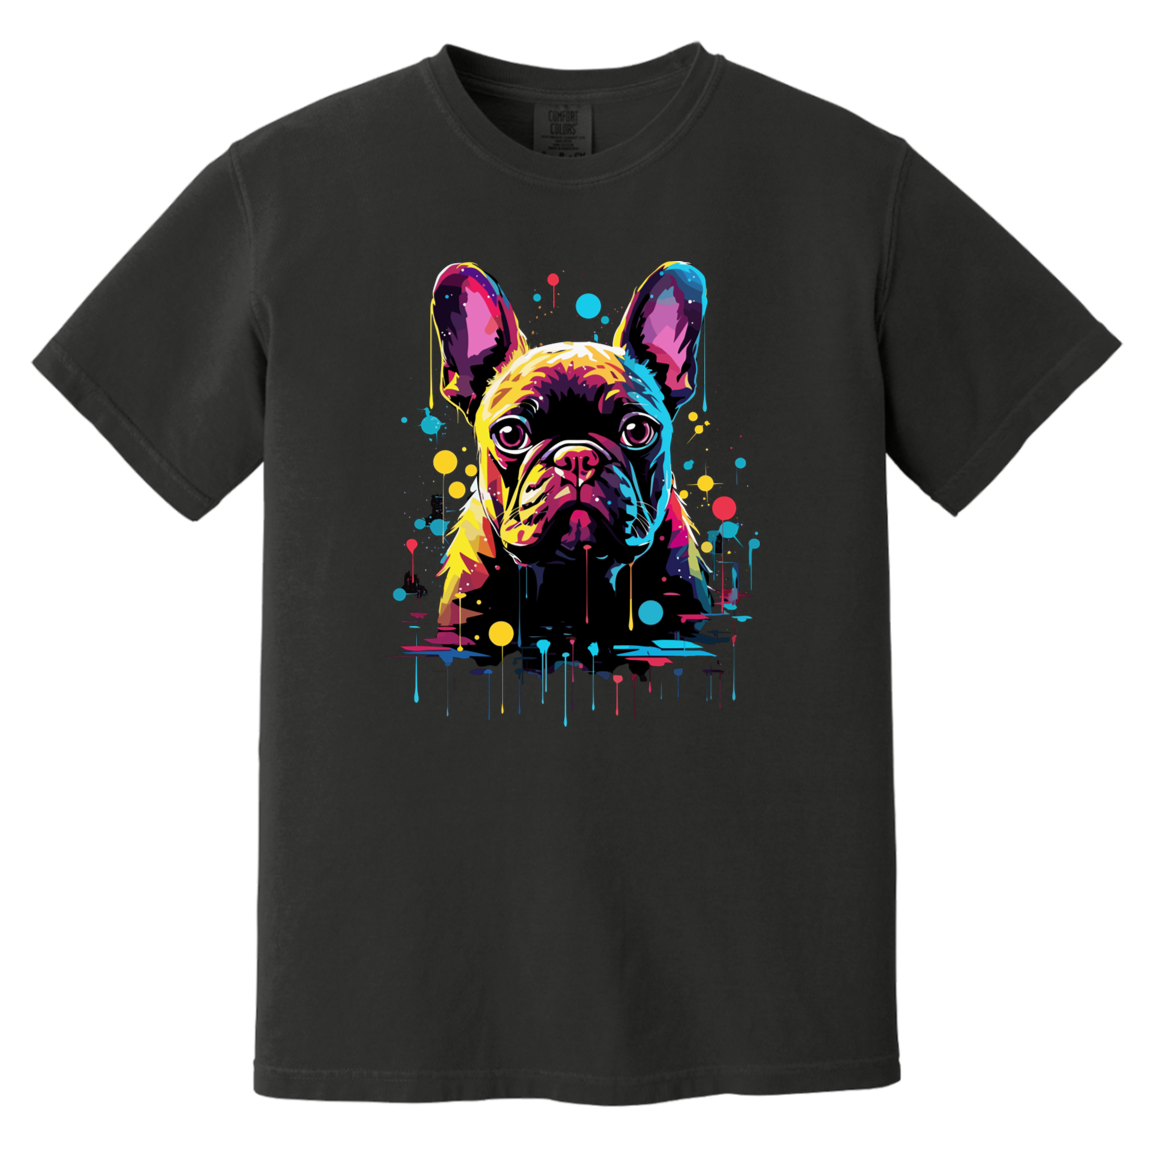 French Bulldog tshirt for Frenchie mom and Frenchie dad and French bulldog fans everywhere-T-Shirts-PureDesignTees